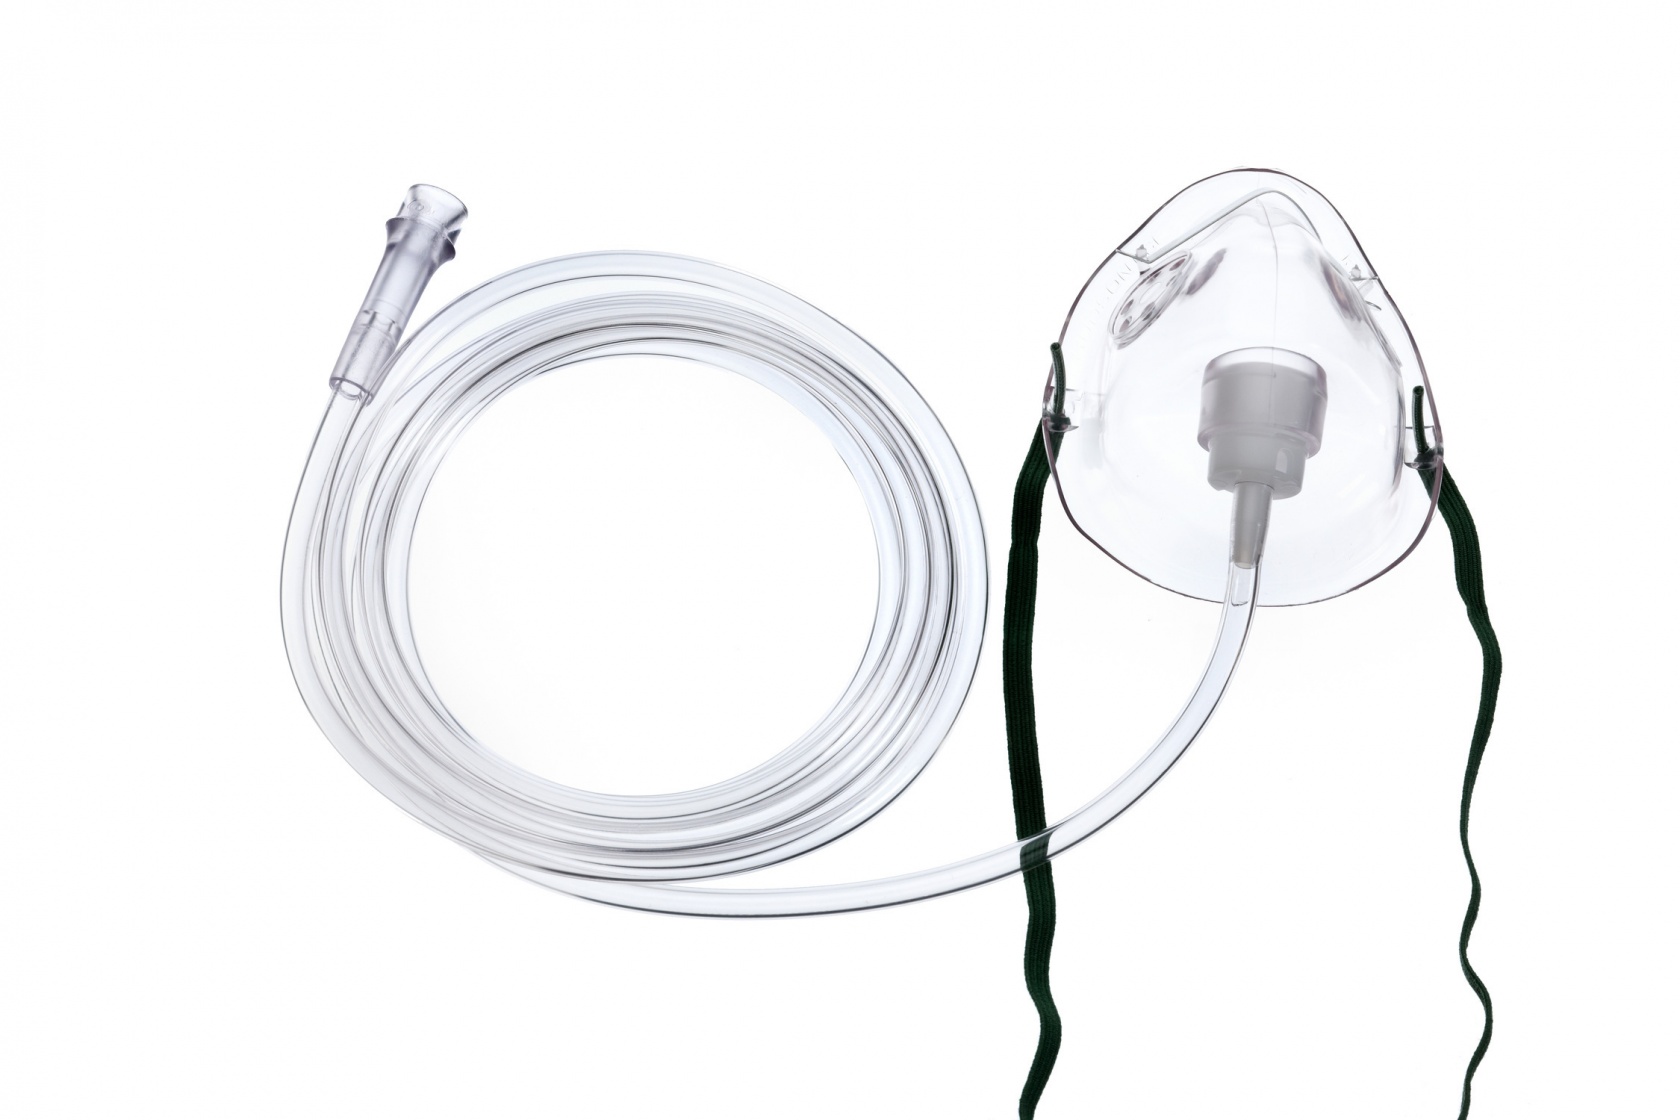 Hudson Mask Medium Concentration with 7ft Oxygen Tubing - Paediatric image 0